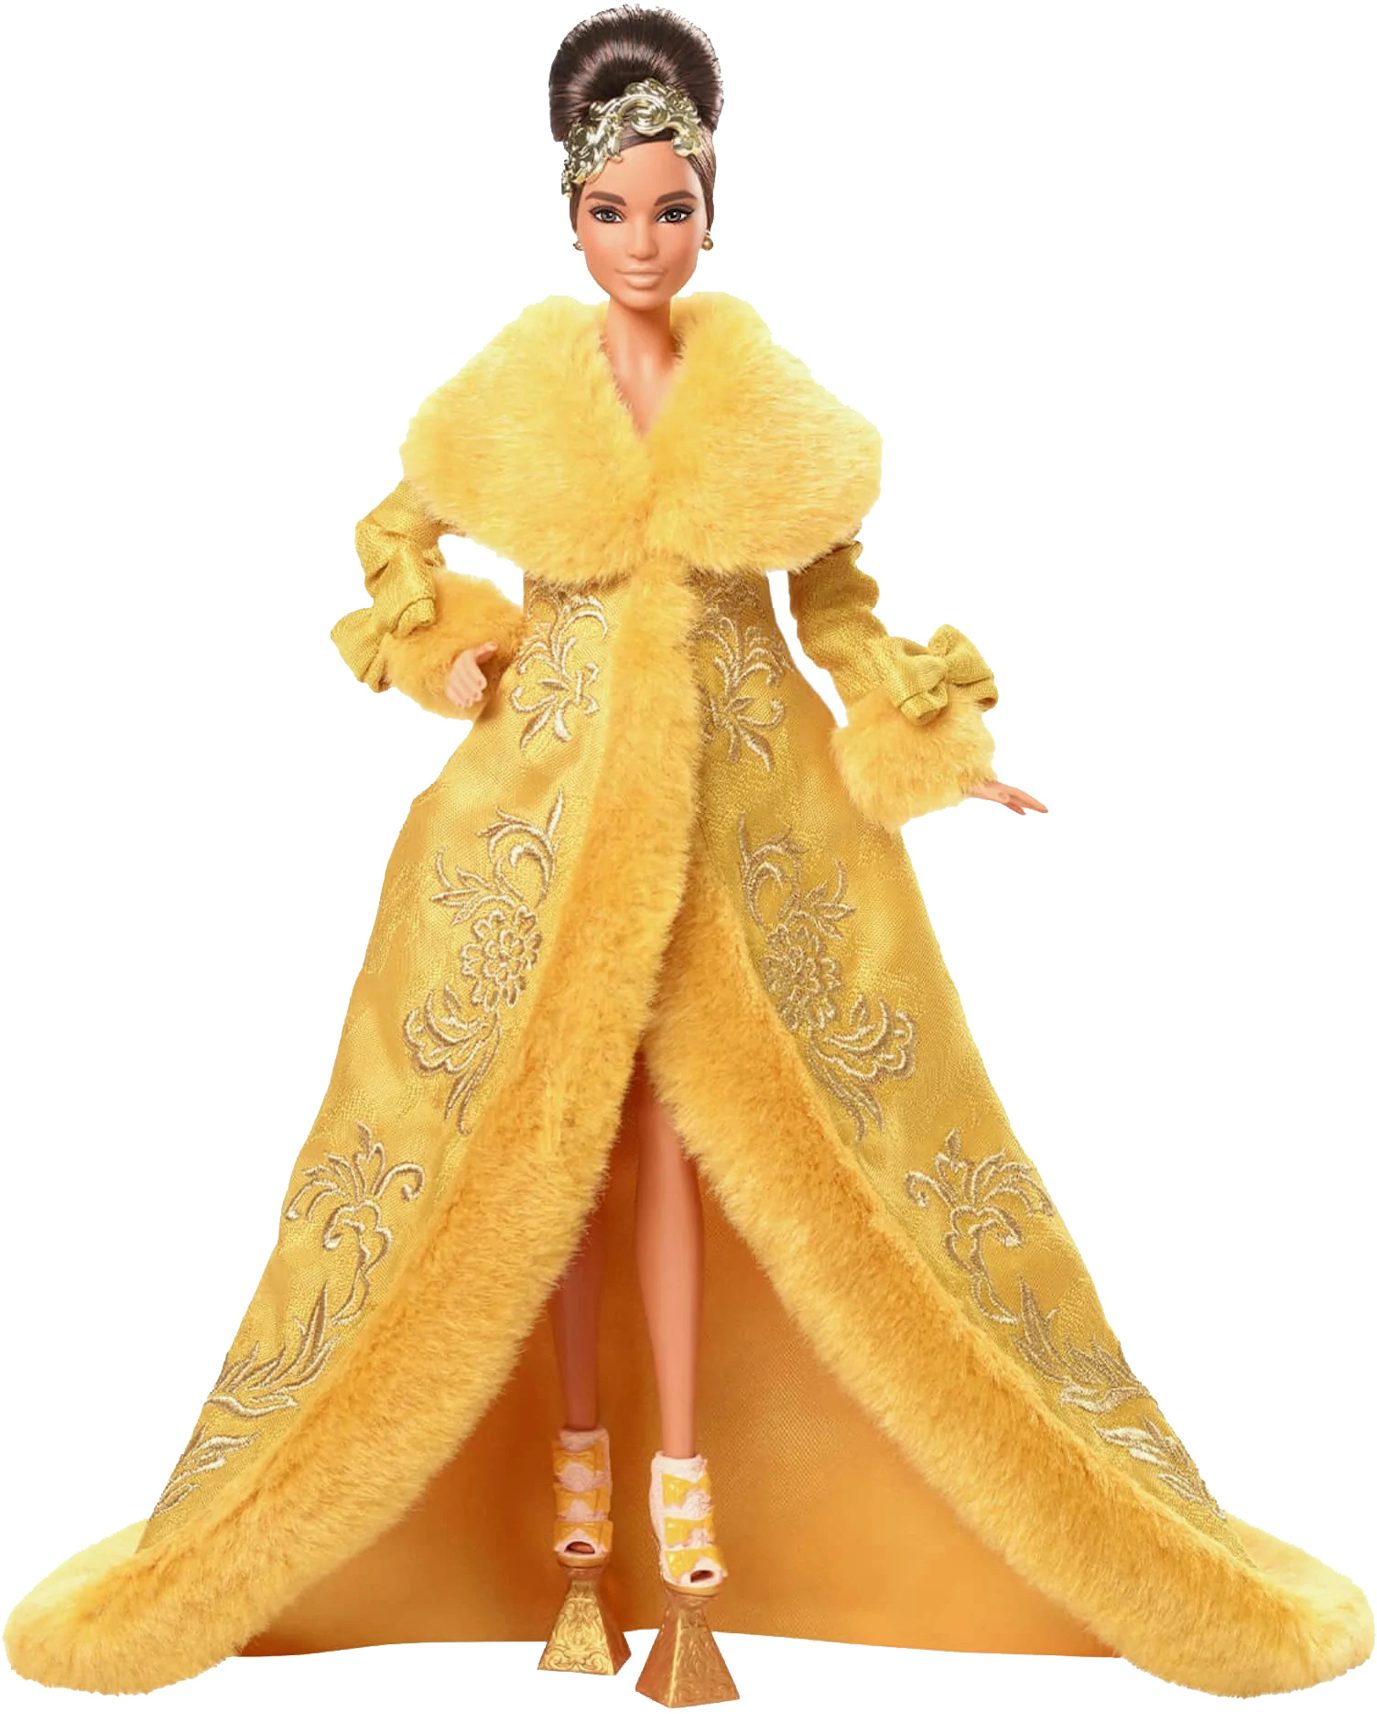 Barbie Signature Guo Pei Barbie® Wearing Golden-Yellow Gown Doll - FW22 - US